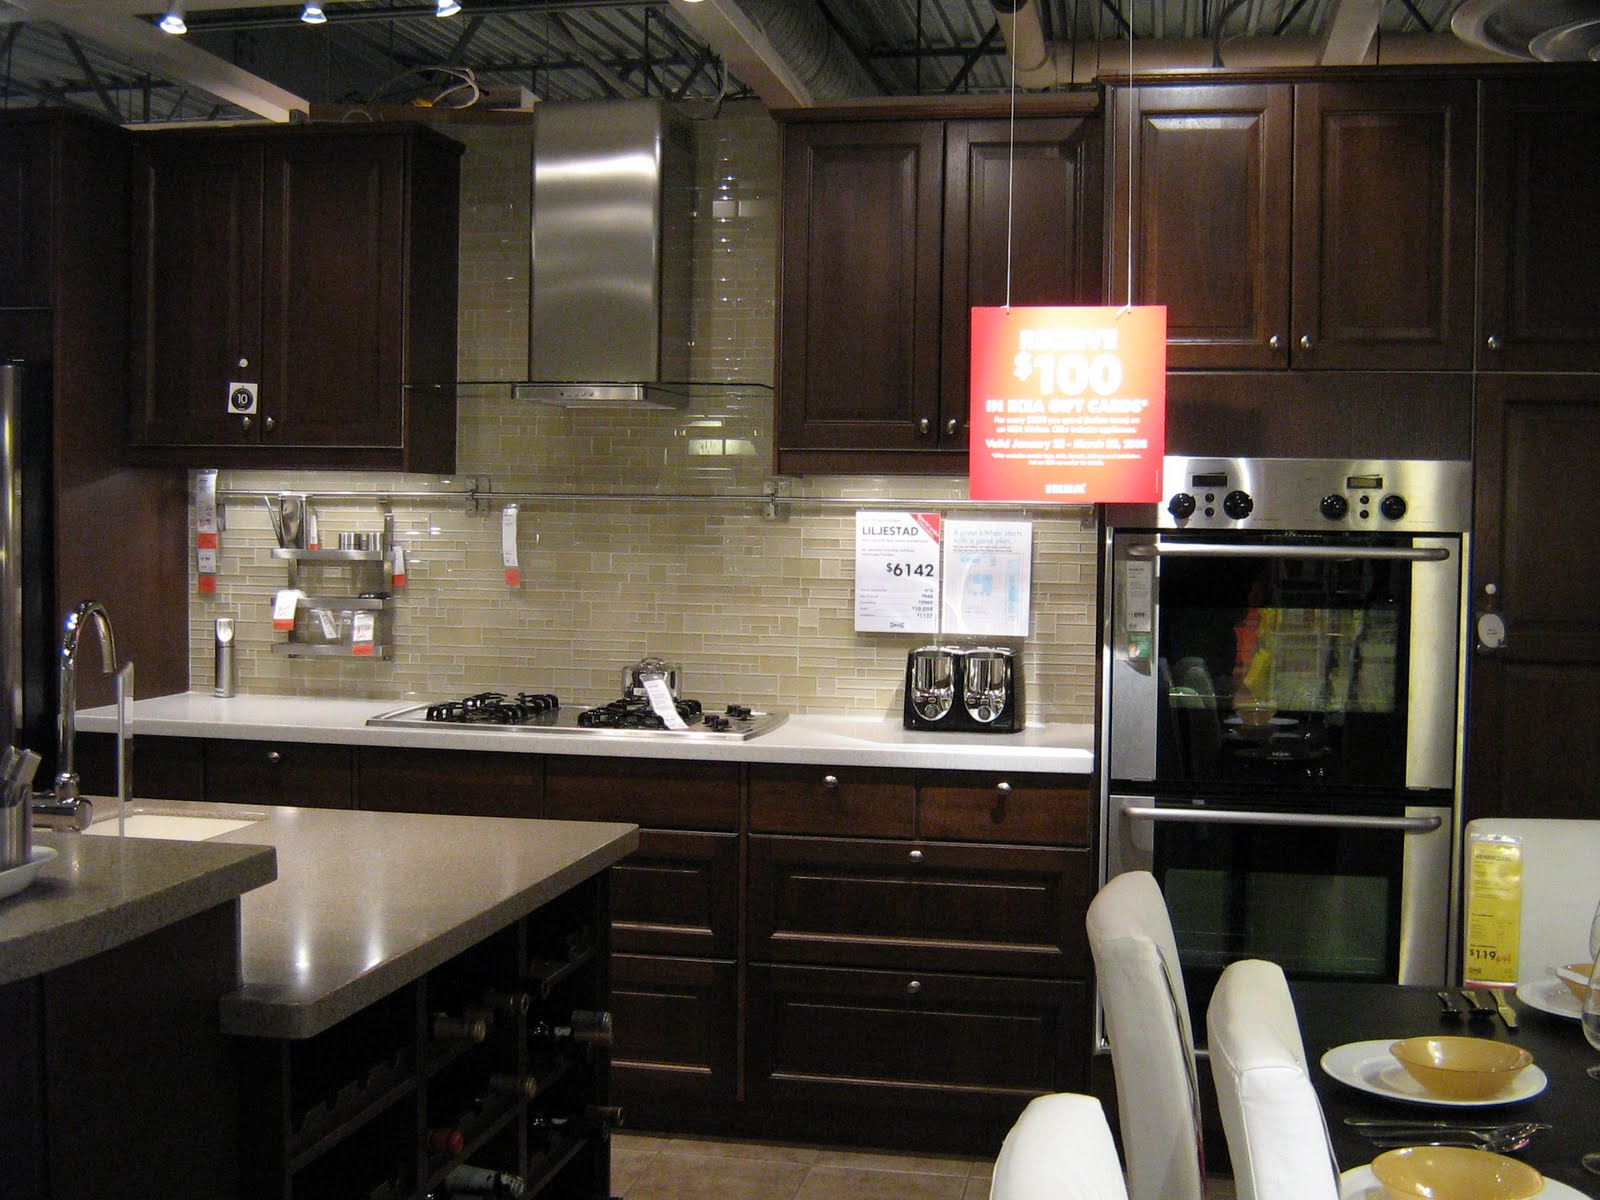 Style Of Kitchen Cabinets